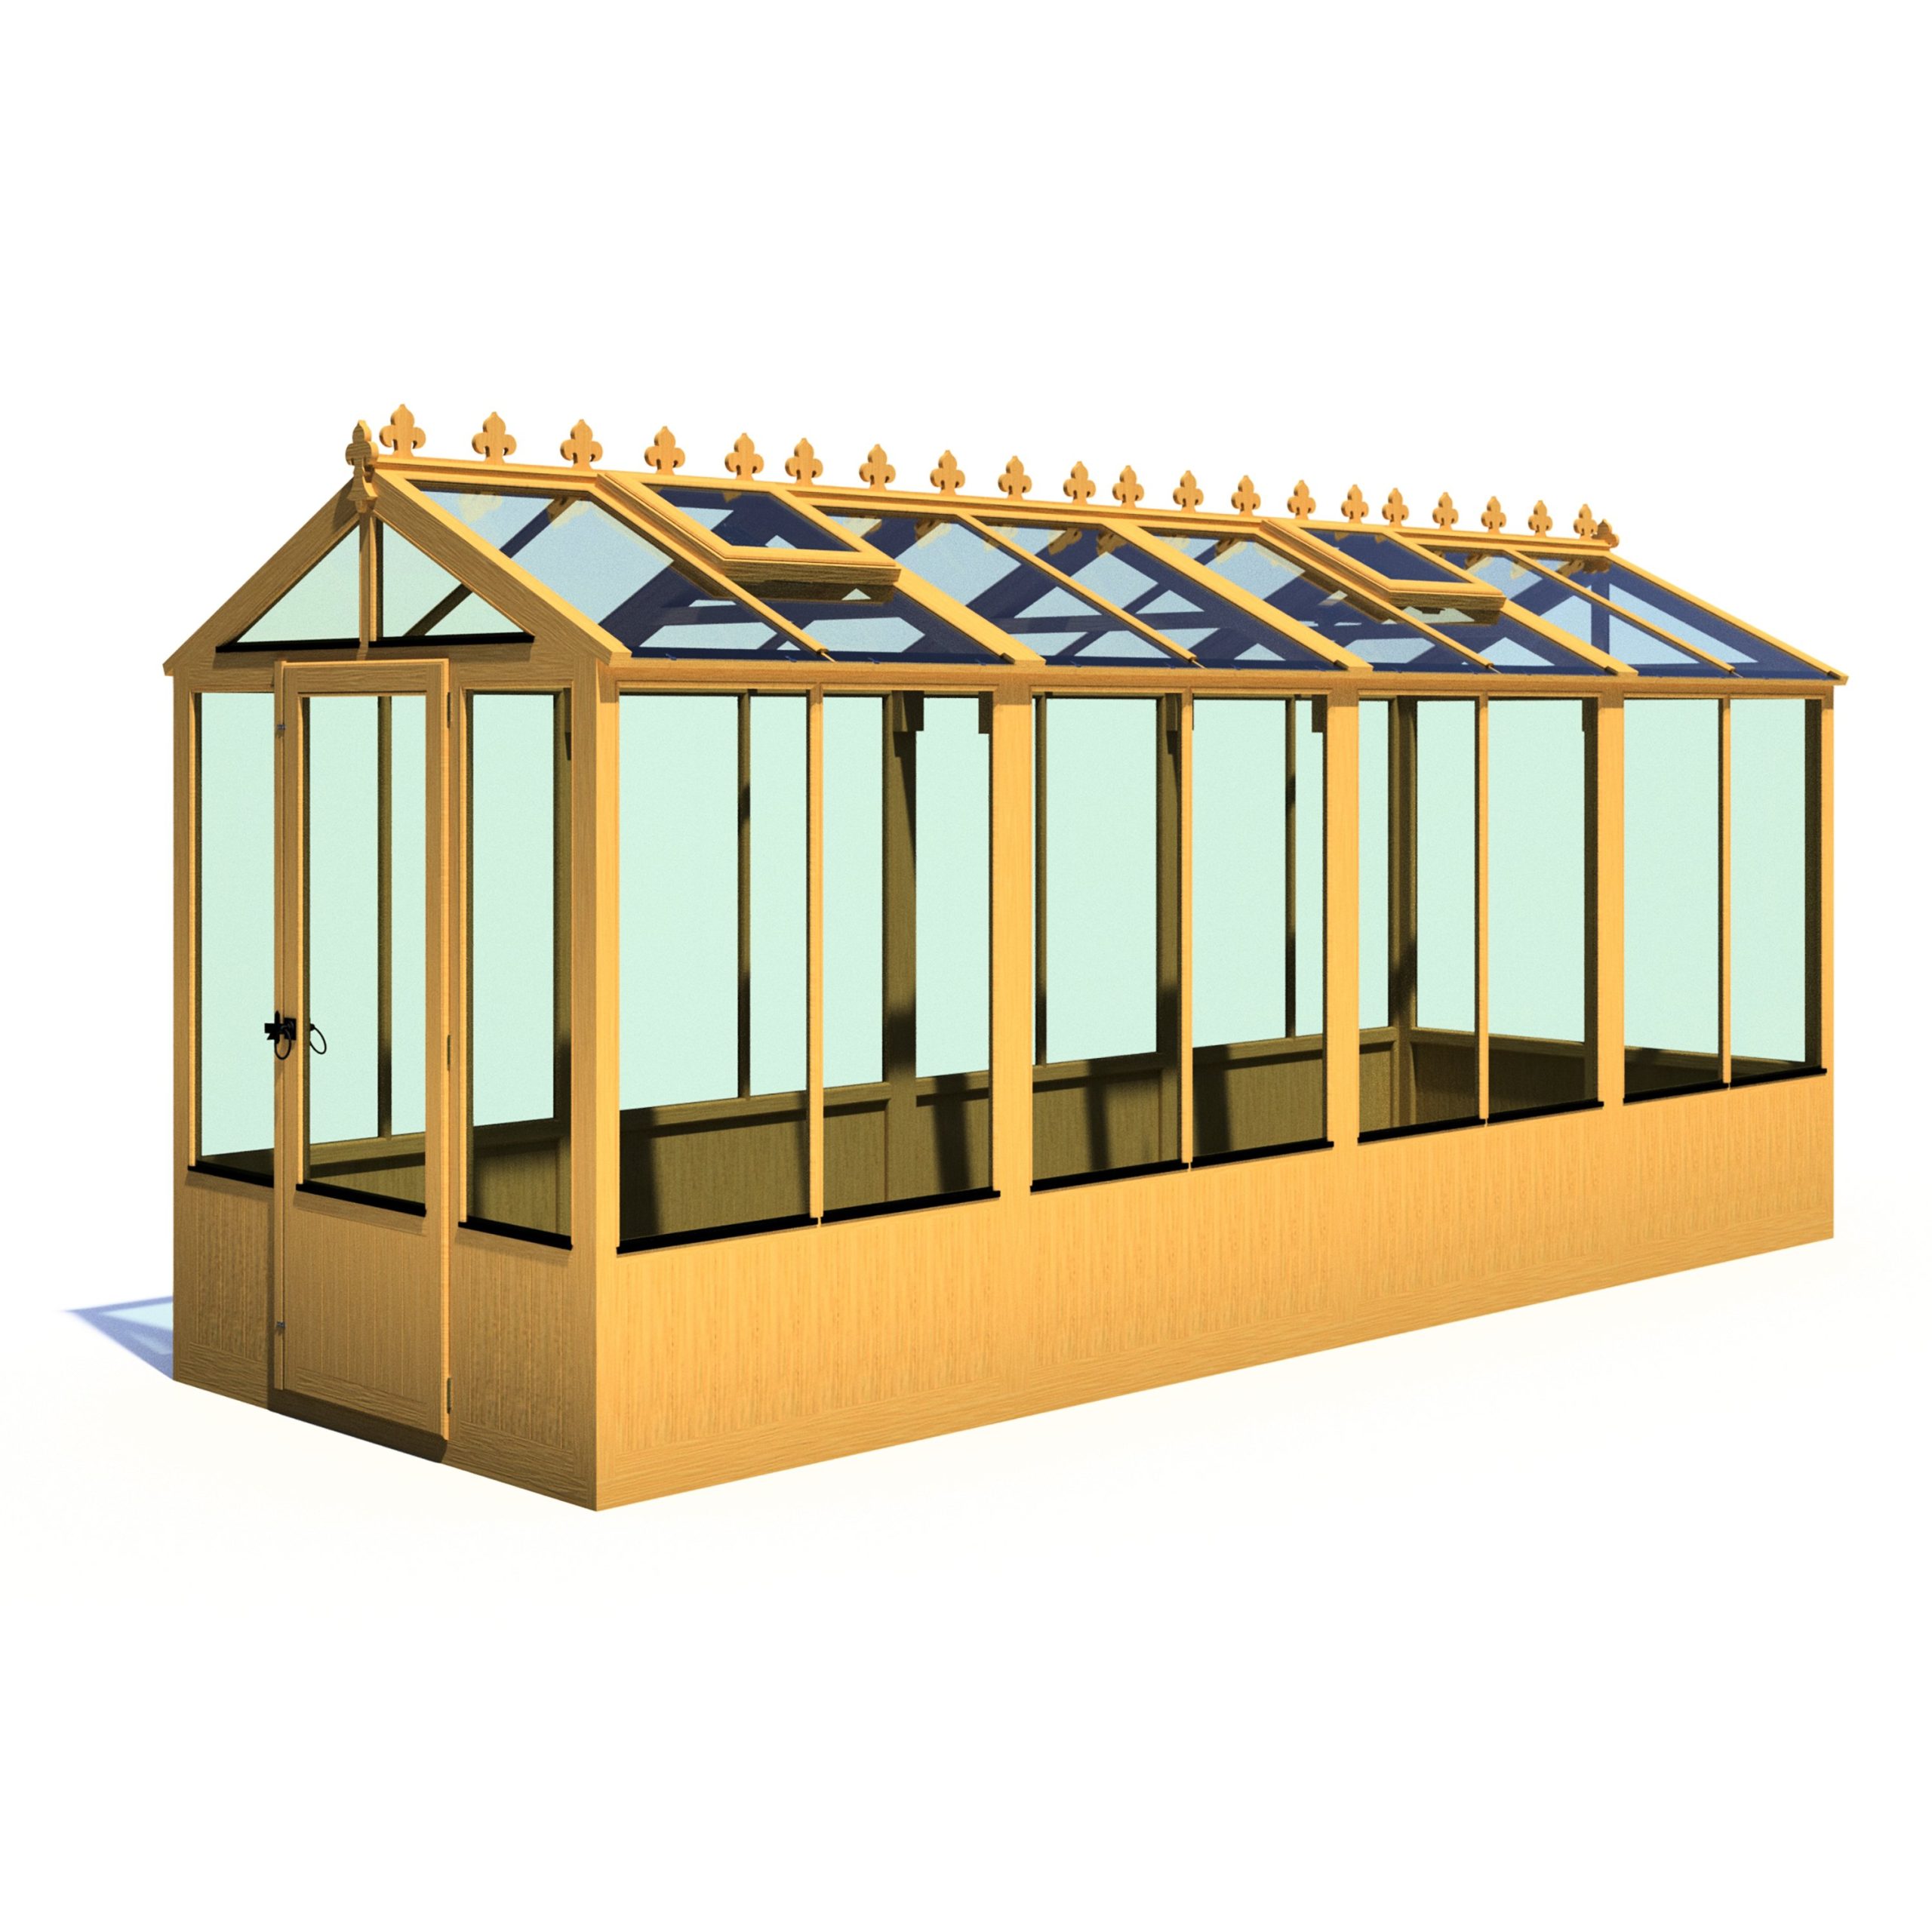 Shire 6x16 Holkham Wooden Greenhouse